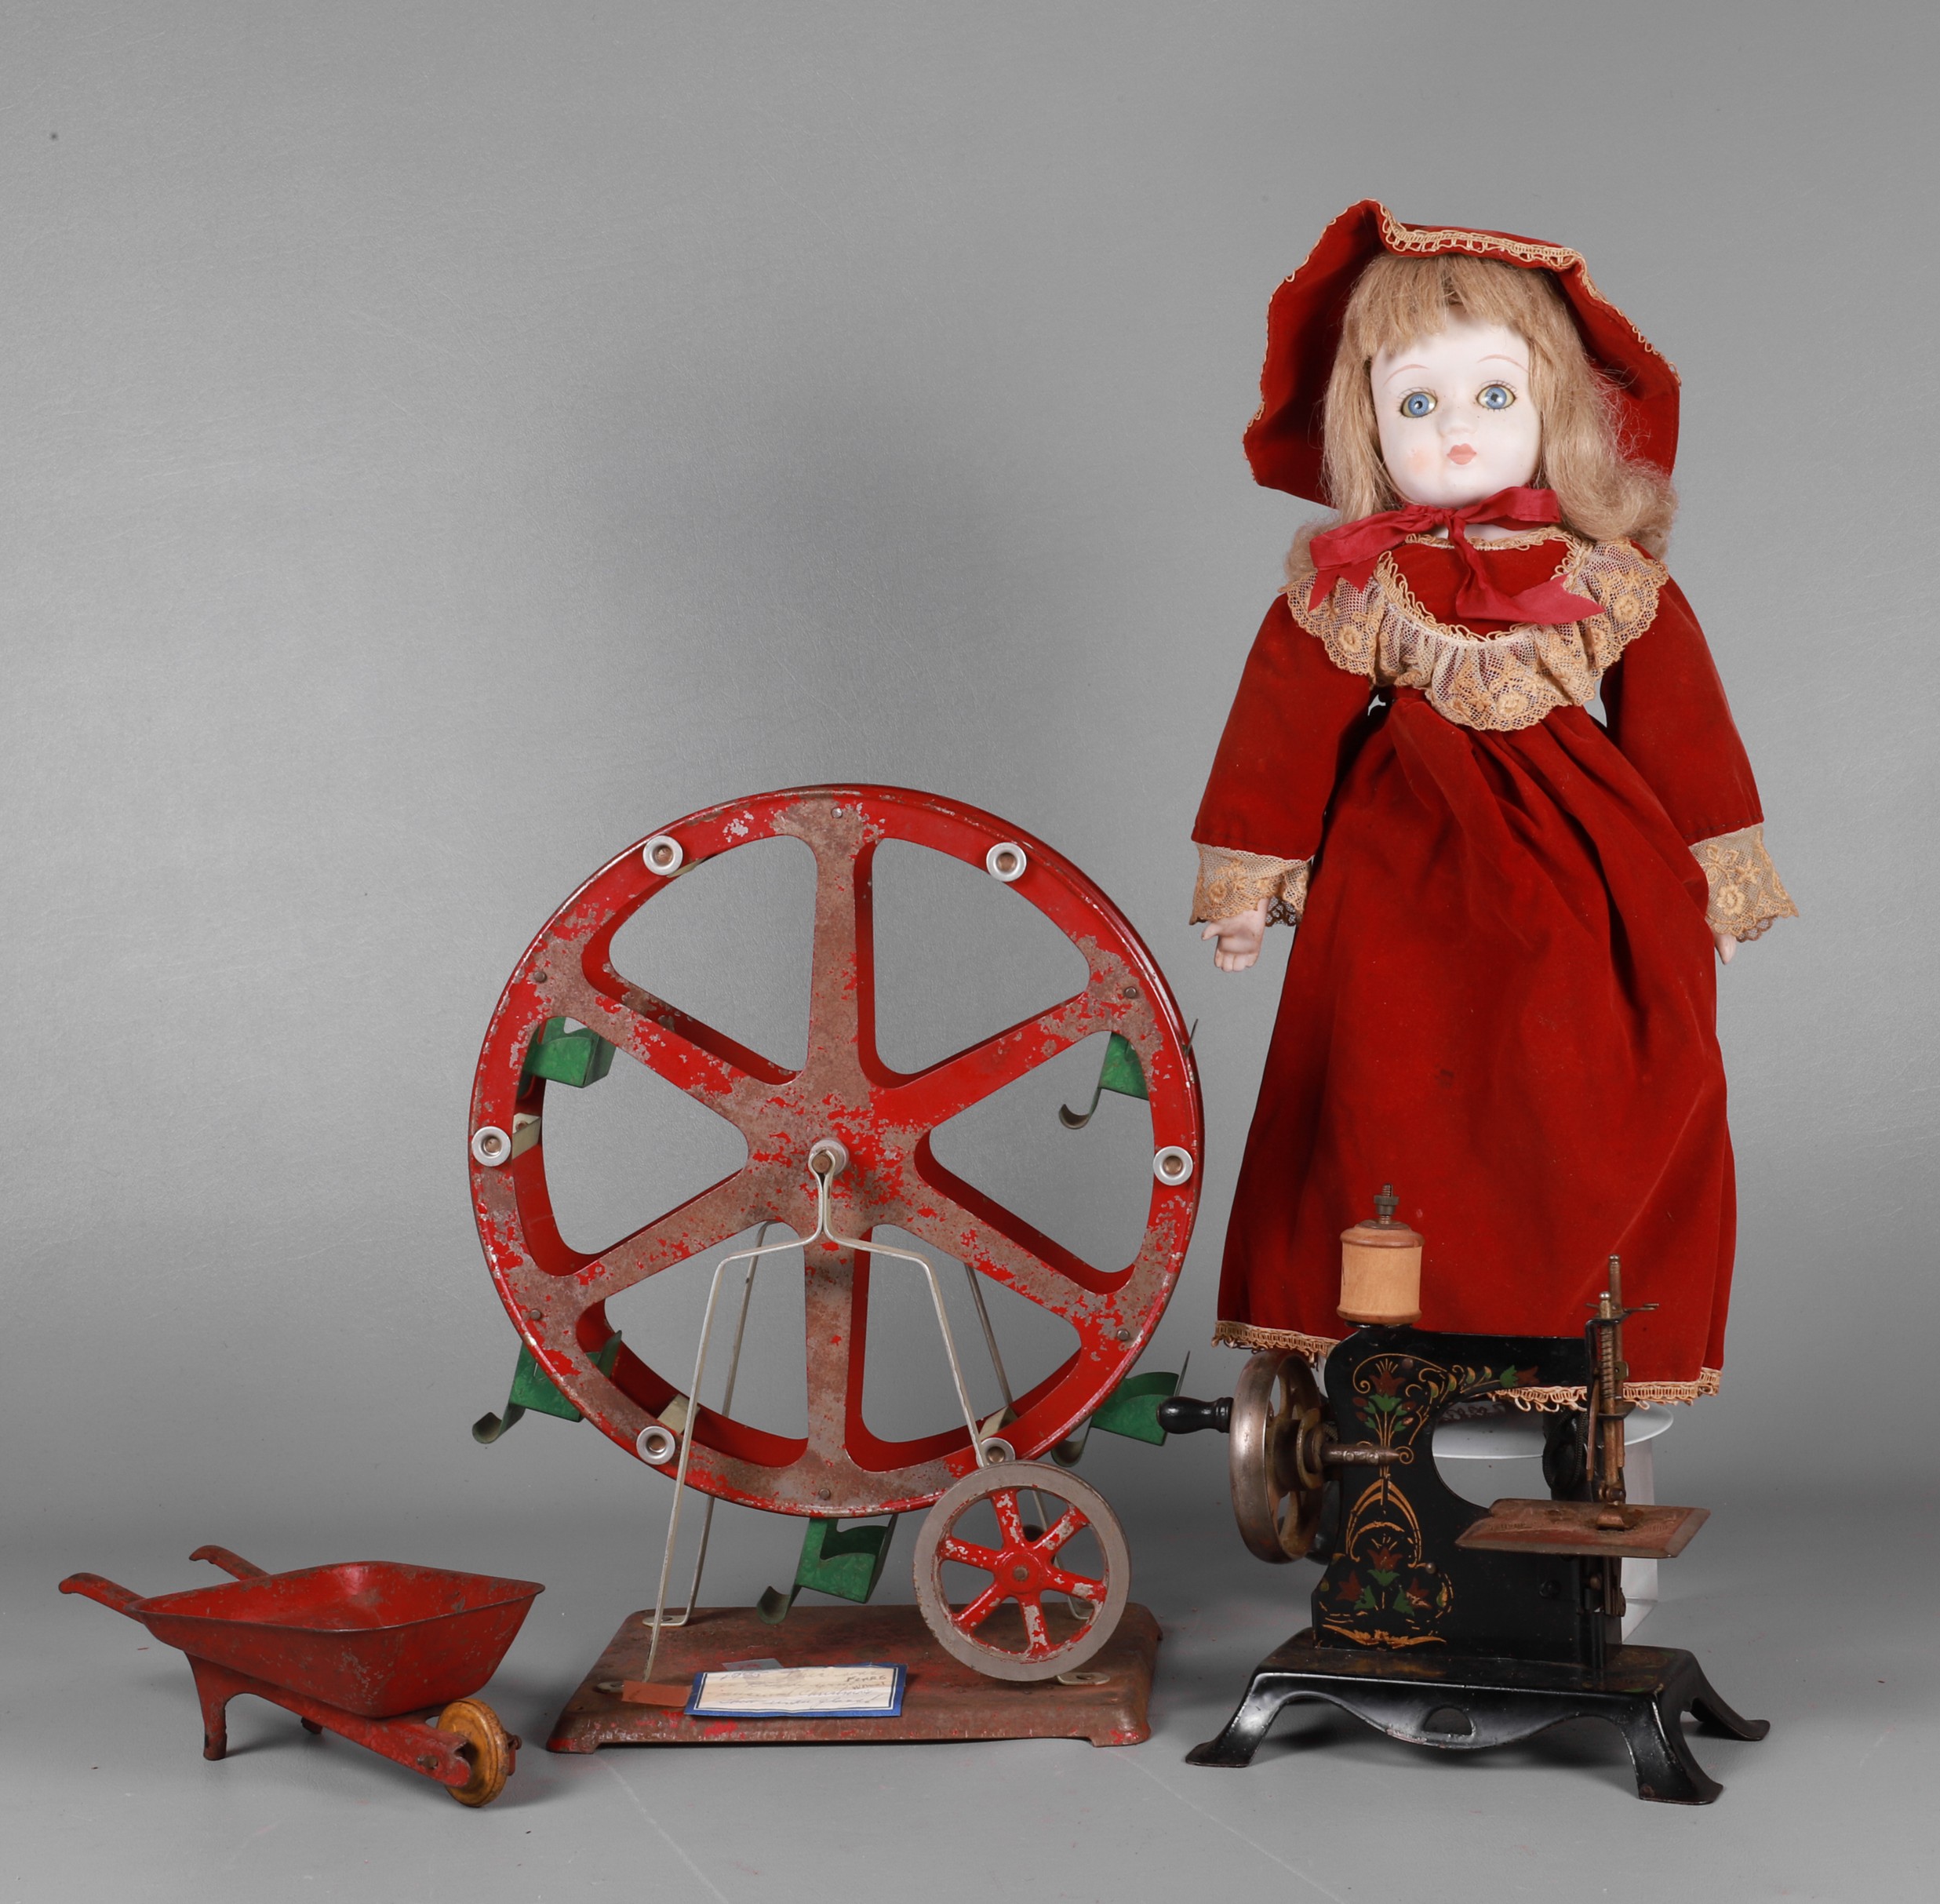 Doll, tin toys and sewing machine to